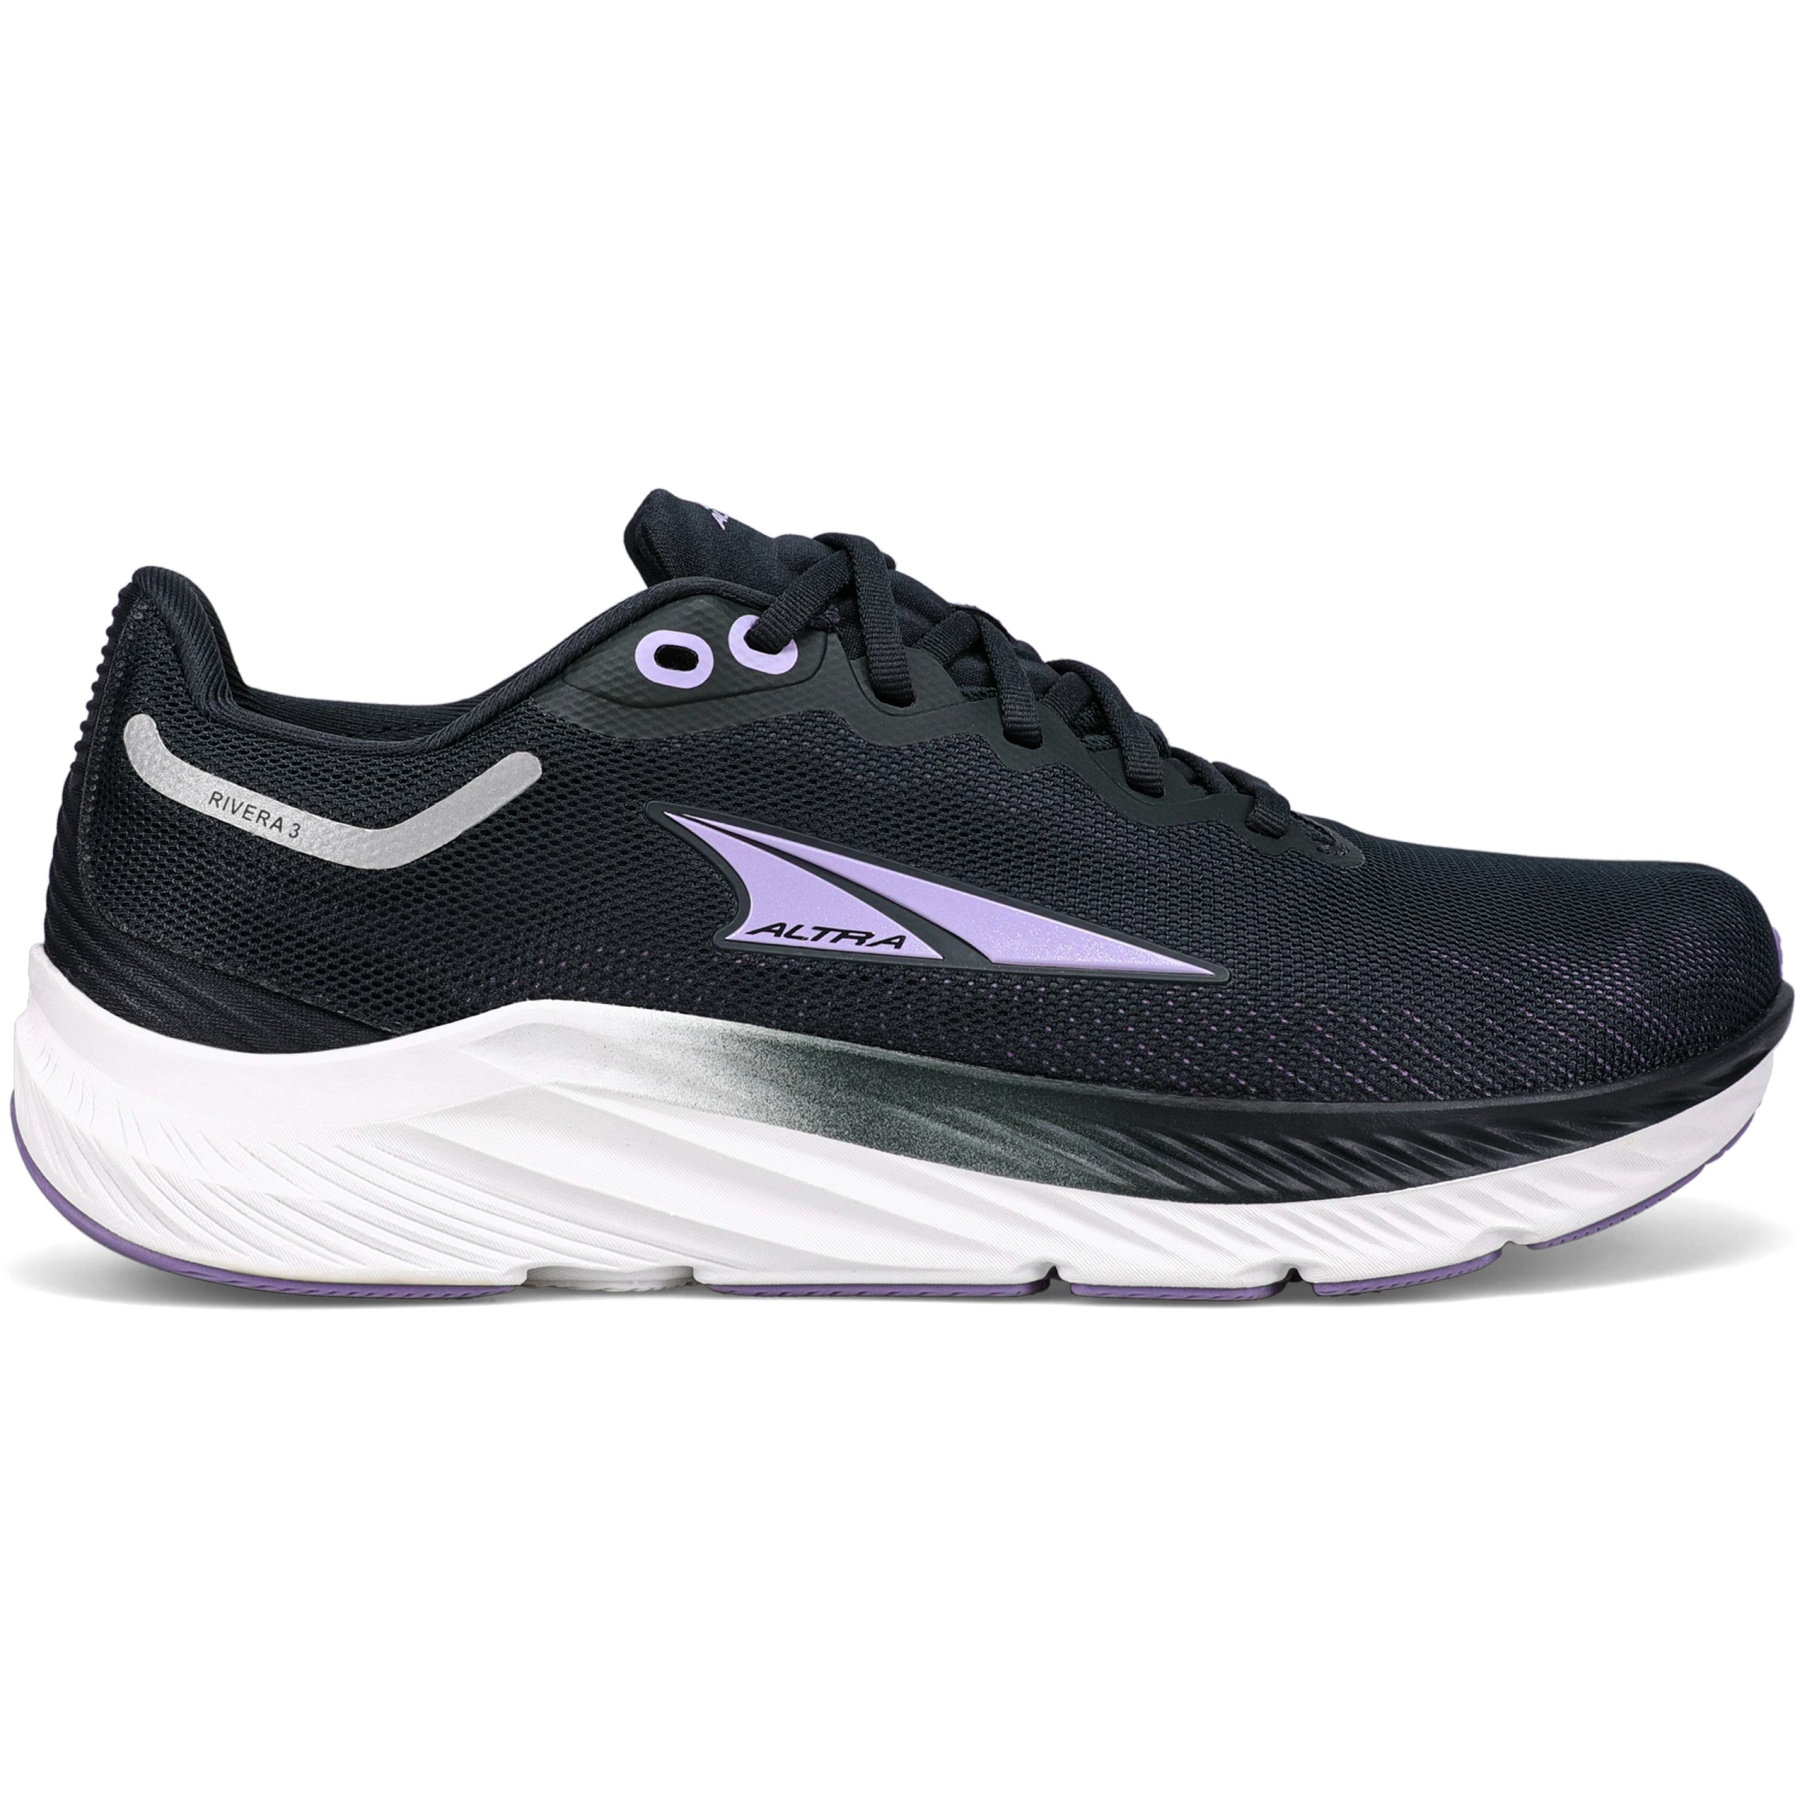 Picture of Altra Rivera 3 Running Shoes Women - Black